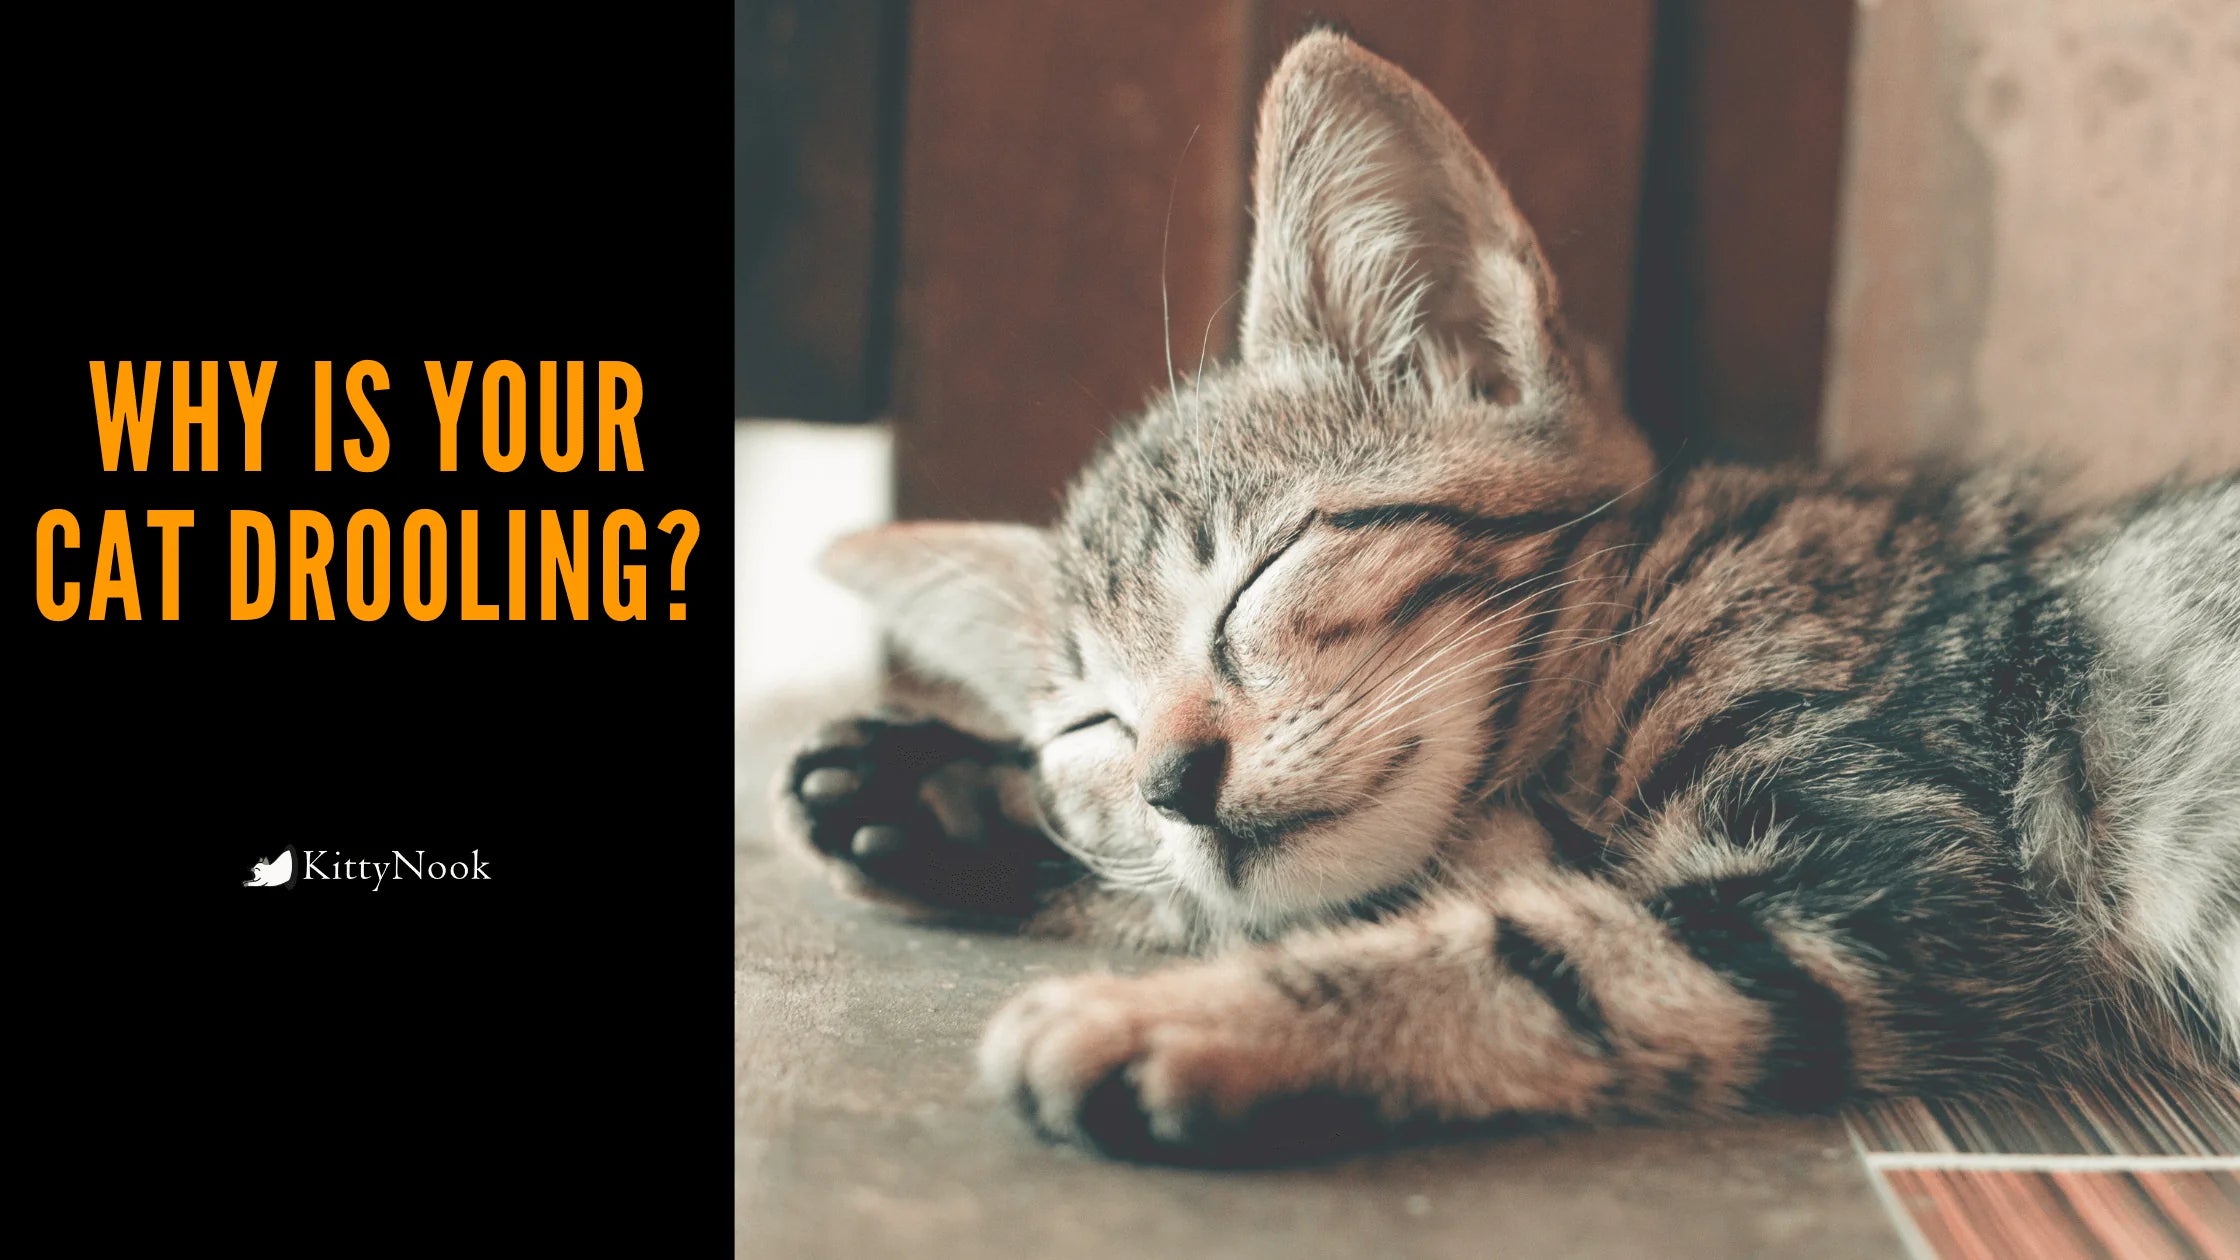 Why Is Your Cat Drooling? - KittyNook Cat Company